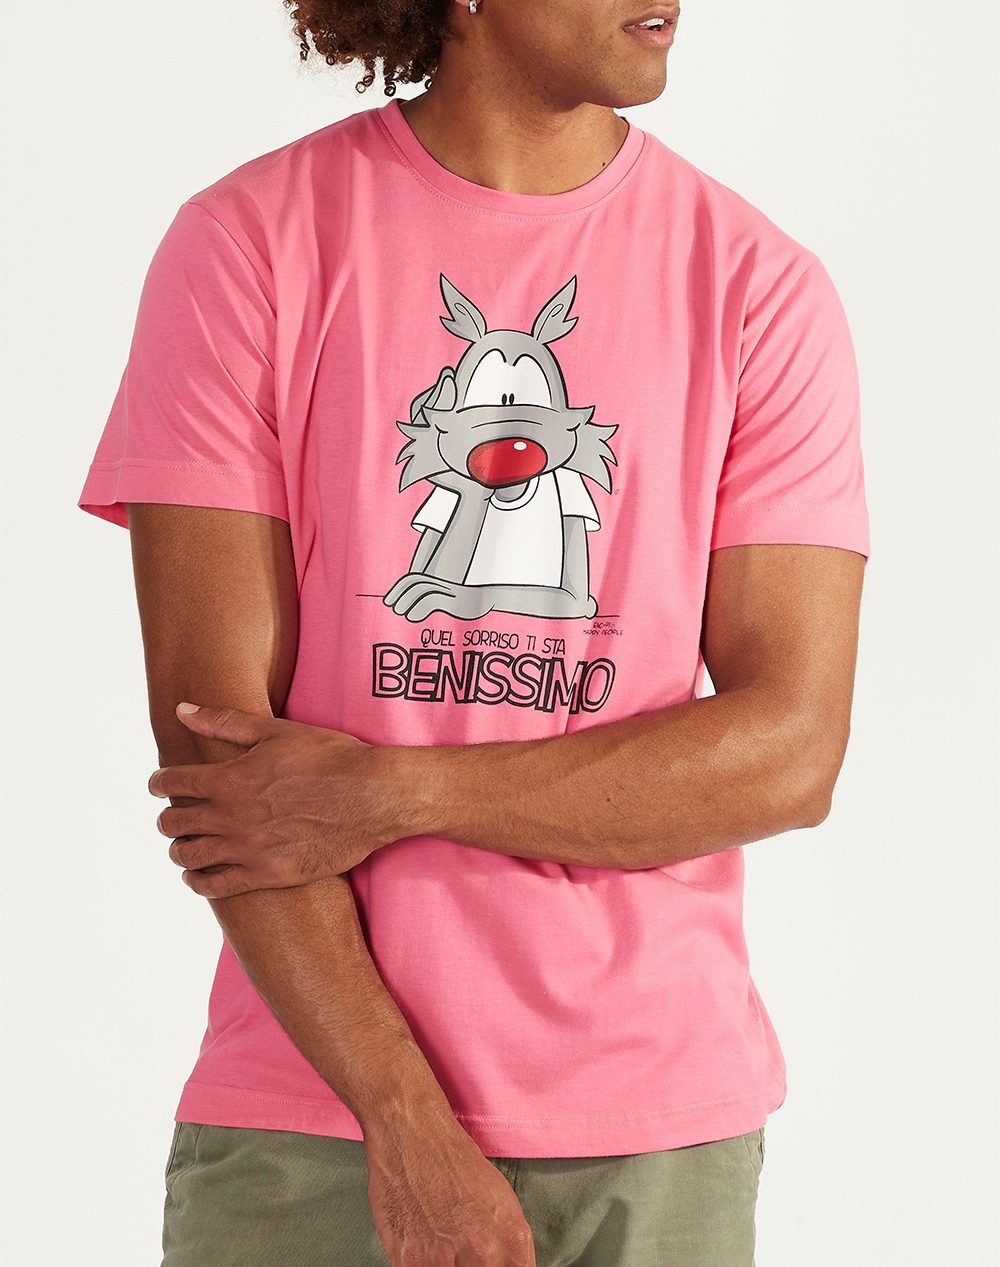 COTTONMANIA 5667 HAPPY PEOPLE ΜΠΛΟΥΖΑ ΑΝΔΡ. ΚΜ TSHIRT COLORATE 5667HP-2281 Pink